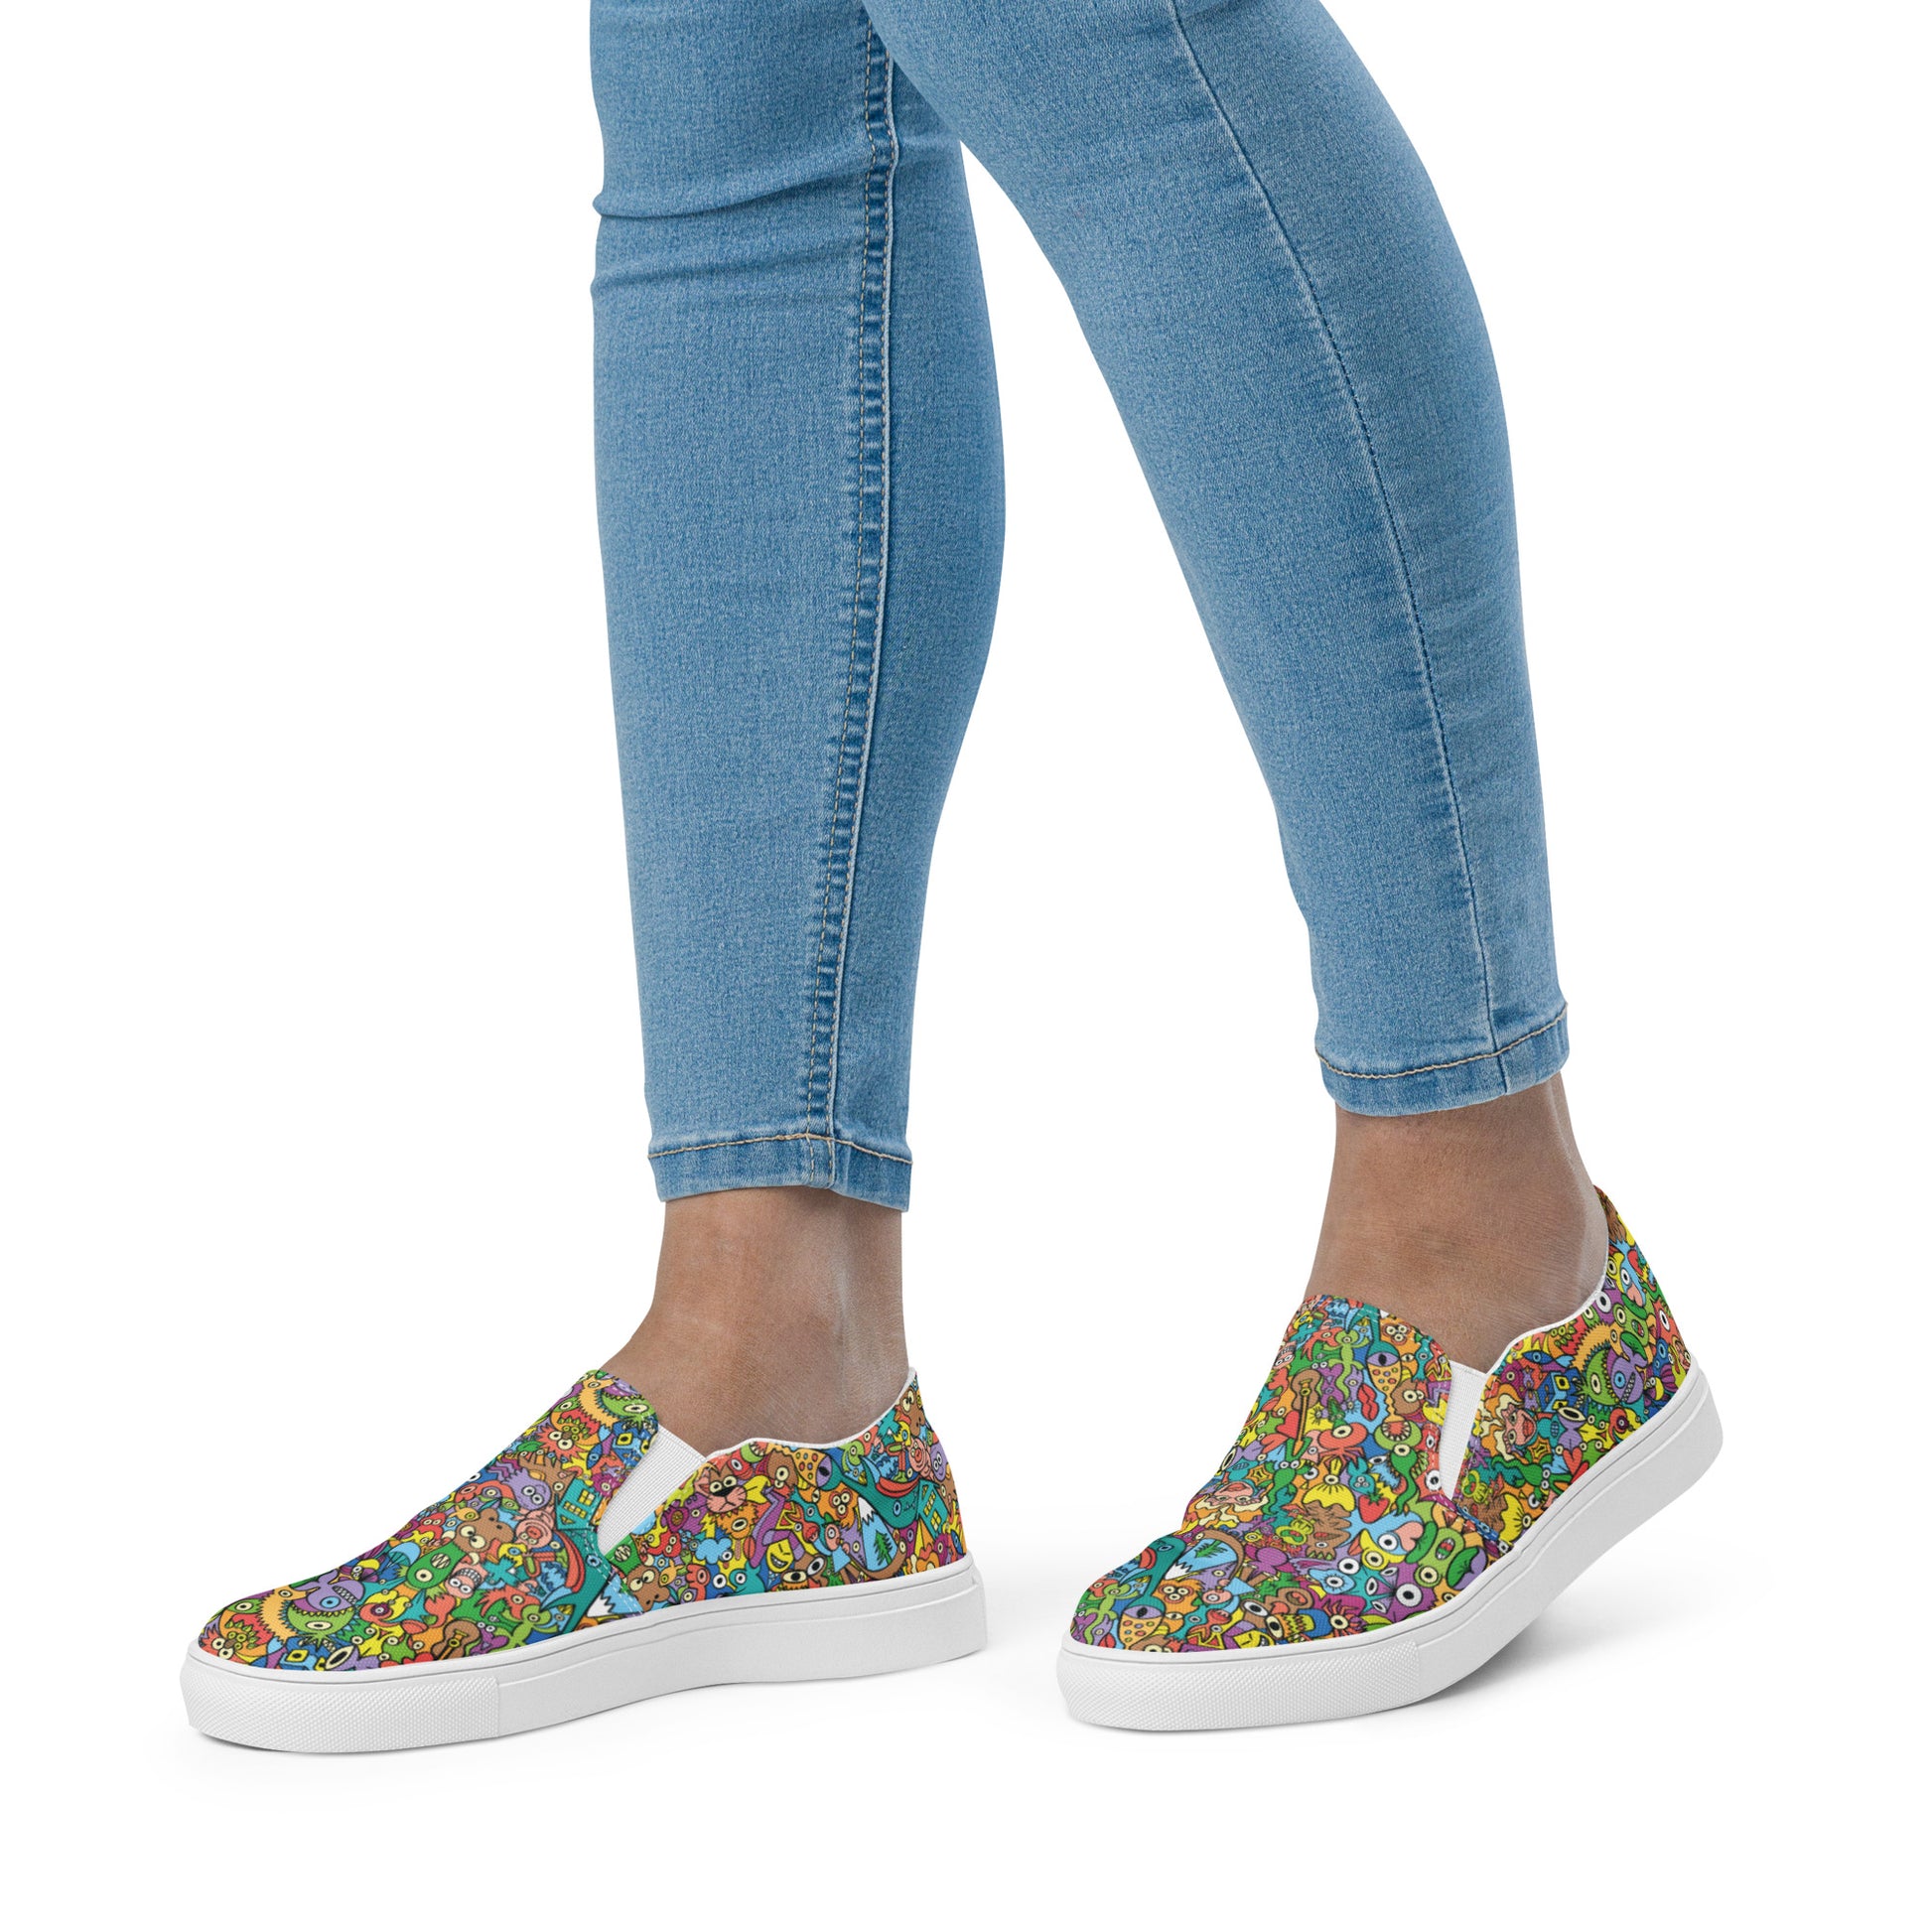 Cheerful crowd enjoying a lively carnival Women’s slip-on canvas shoes. Lifestyle